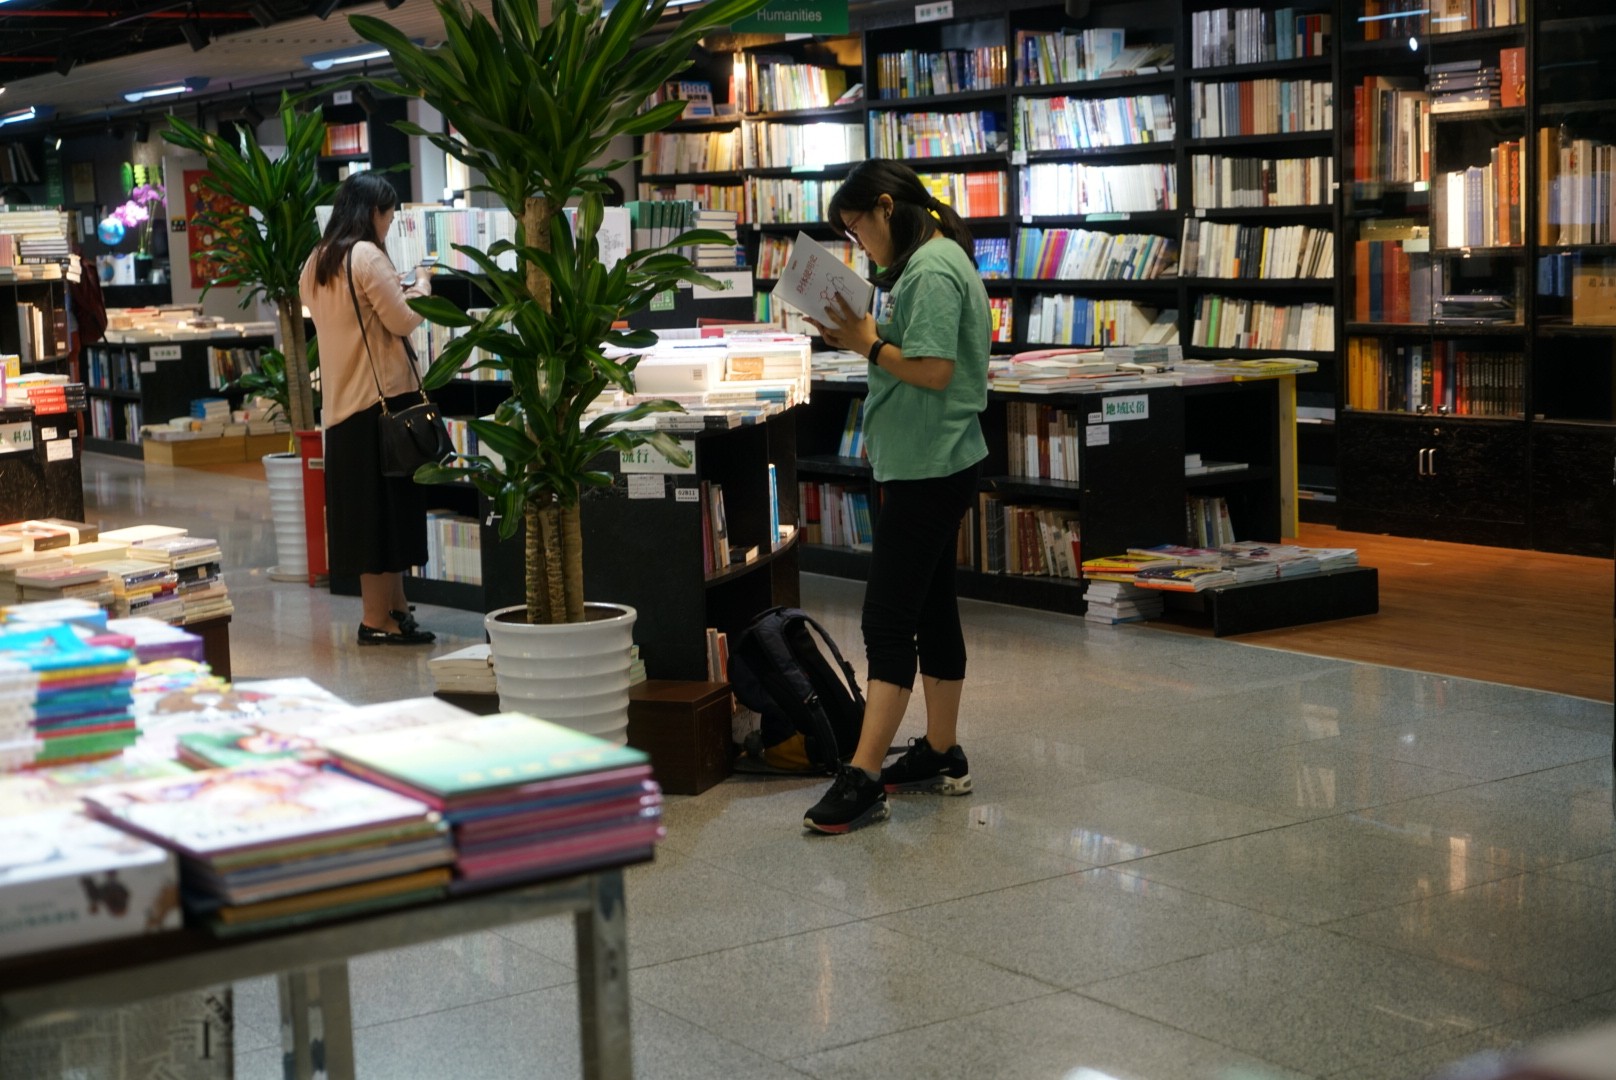 Authorities forced cancellation of seminars at Jifeng Bookstore on topics ranging from South China Sea to constitutionalism